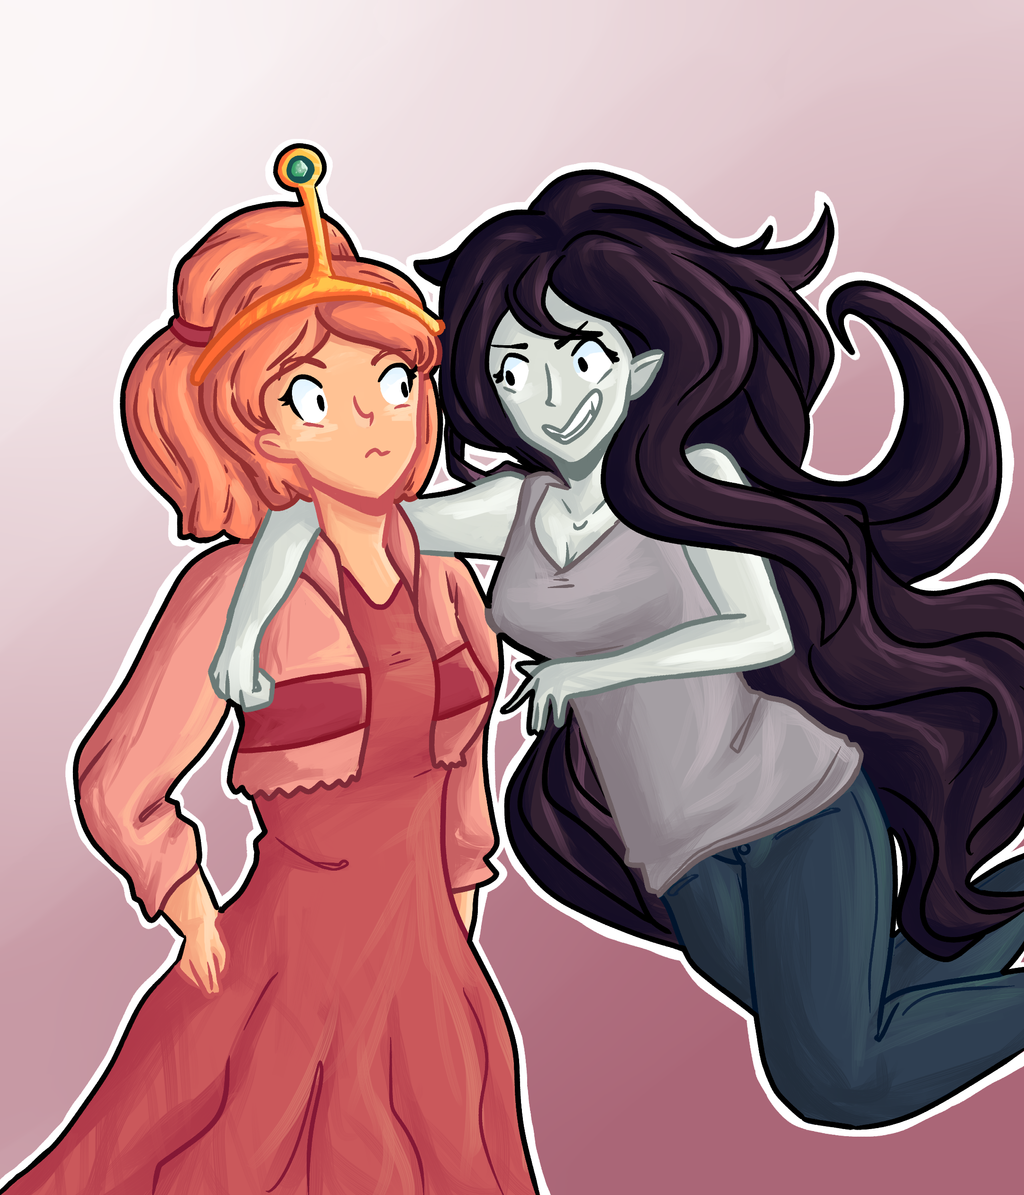 Marceline and PB by yettii on DeviantArt